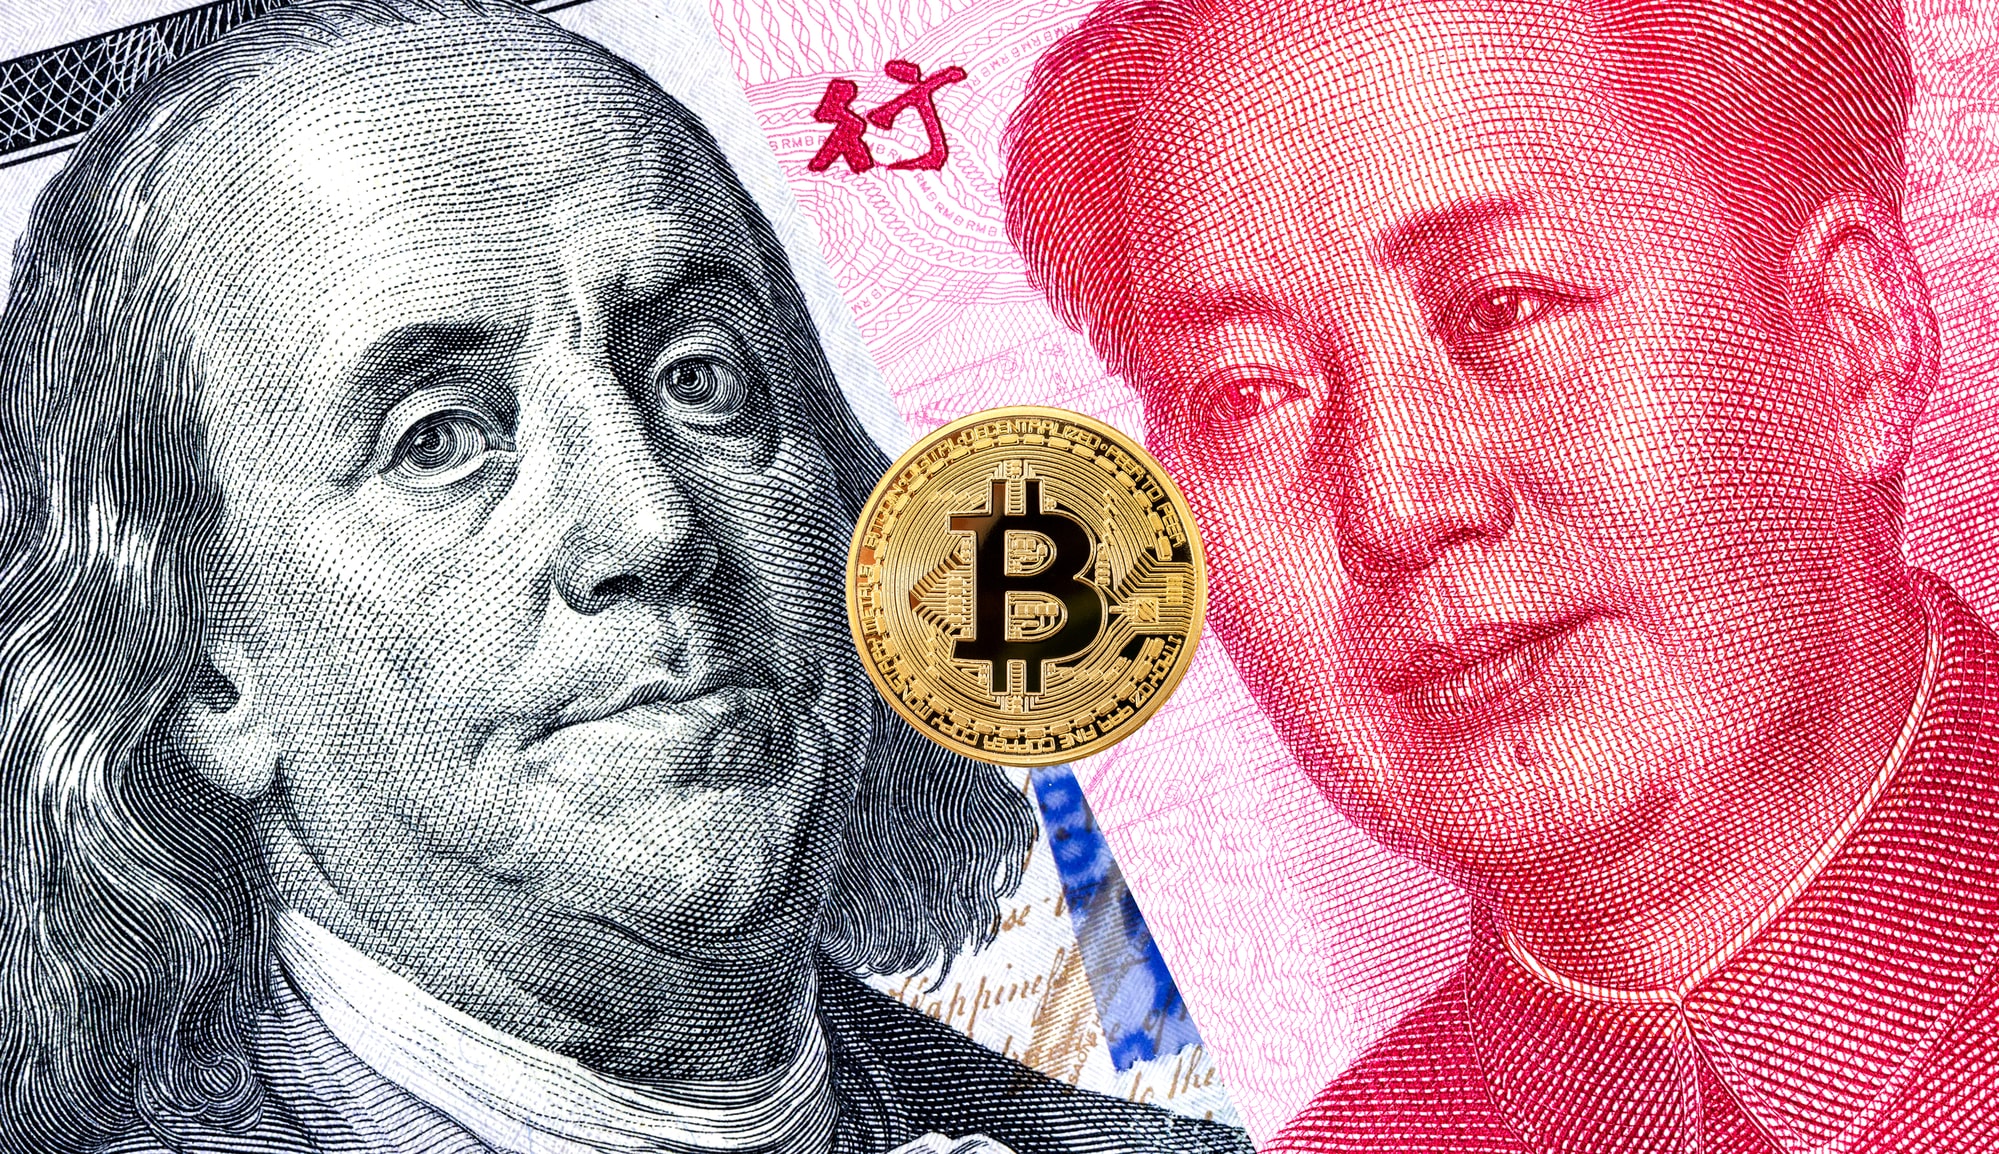 Crypto experts: China’s crackdown may be ‘great news for Bitcoin’